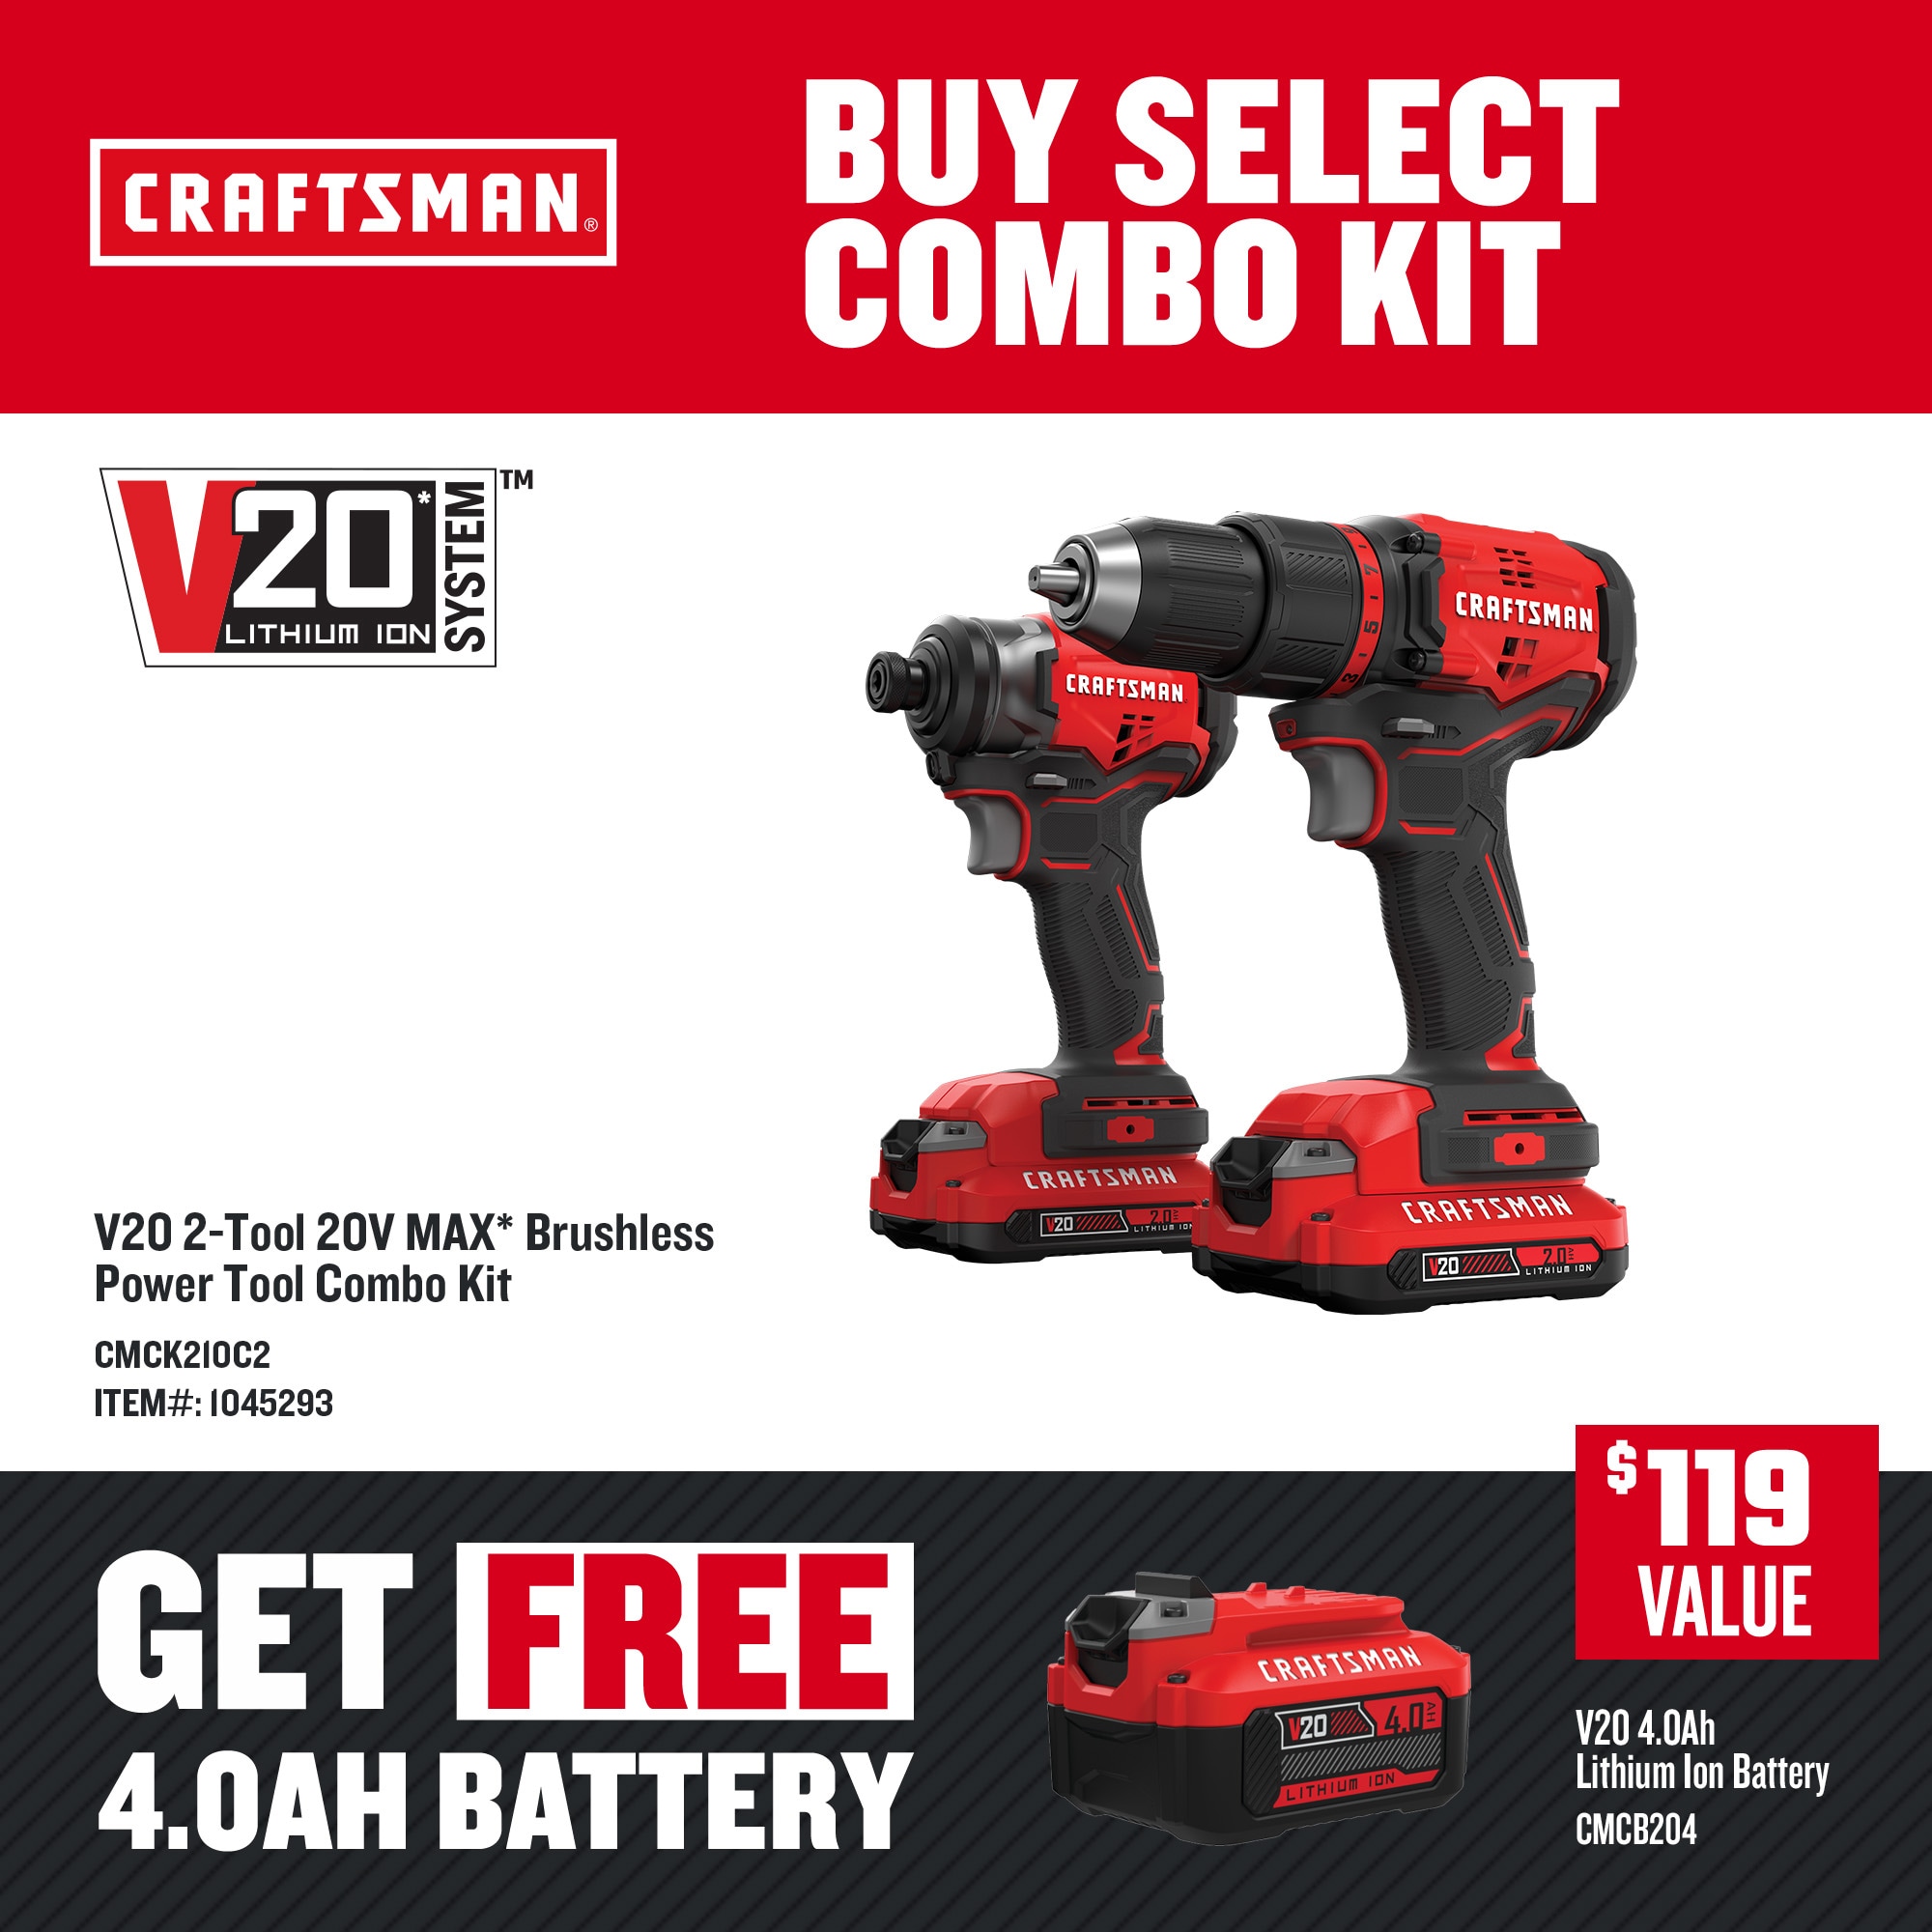 CRAFTSMAN 2-Tool Brushless Power Tool Combo Kit with Soft Case (Li-ion Batteries and Charger Included)